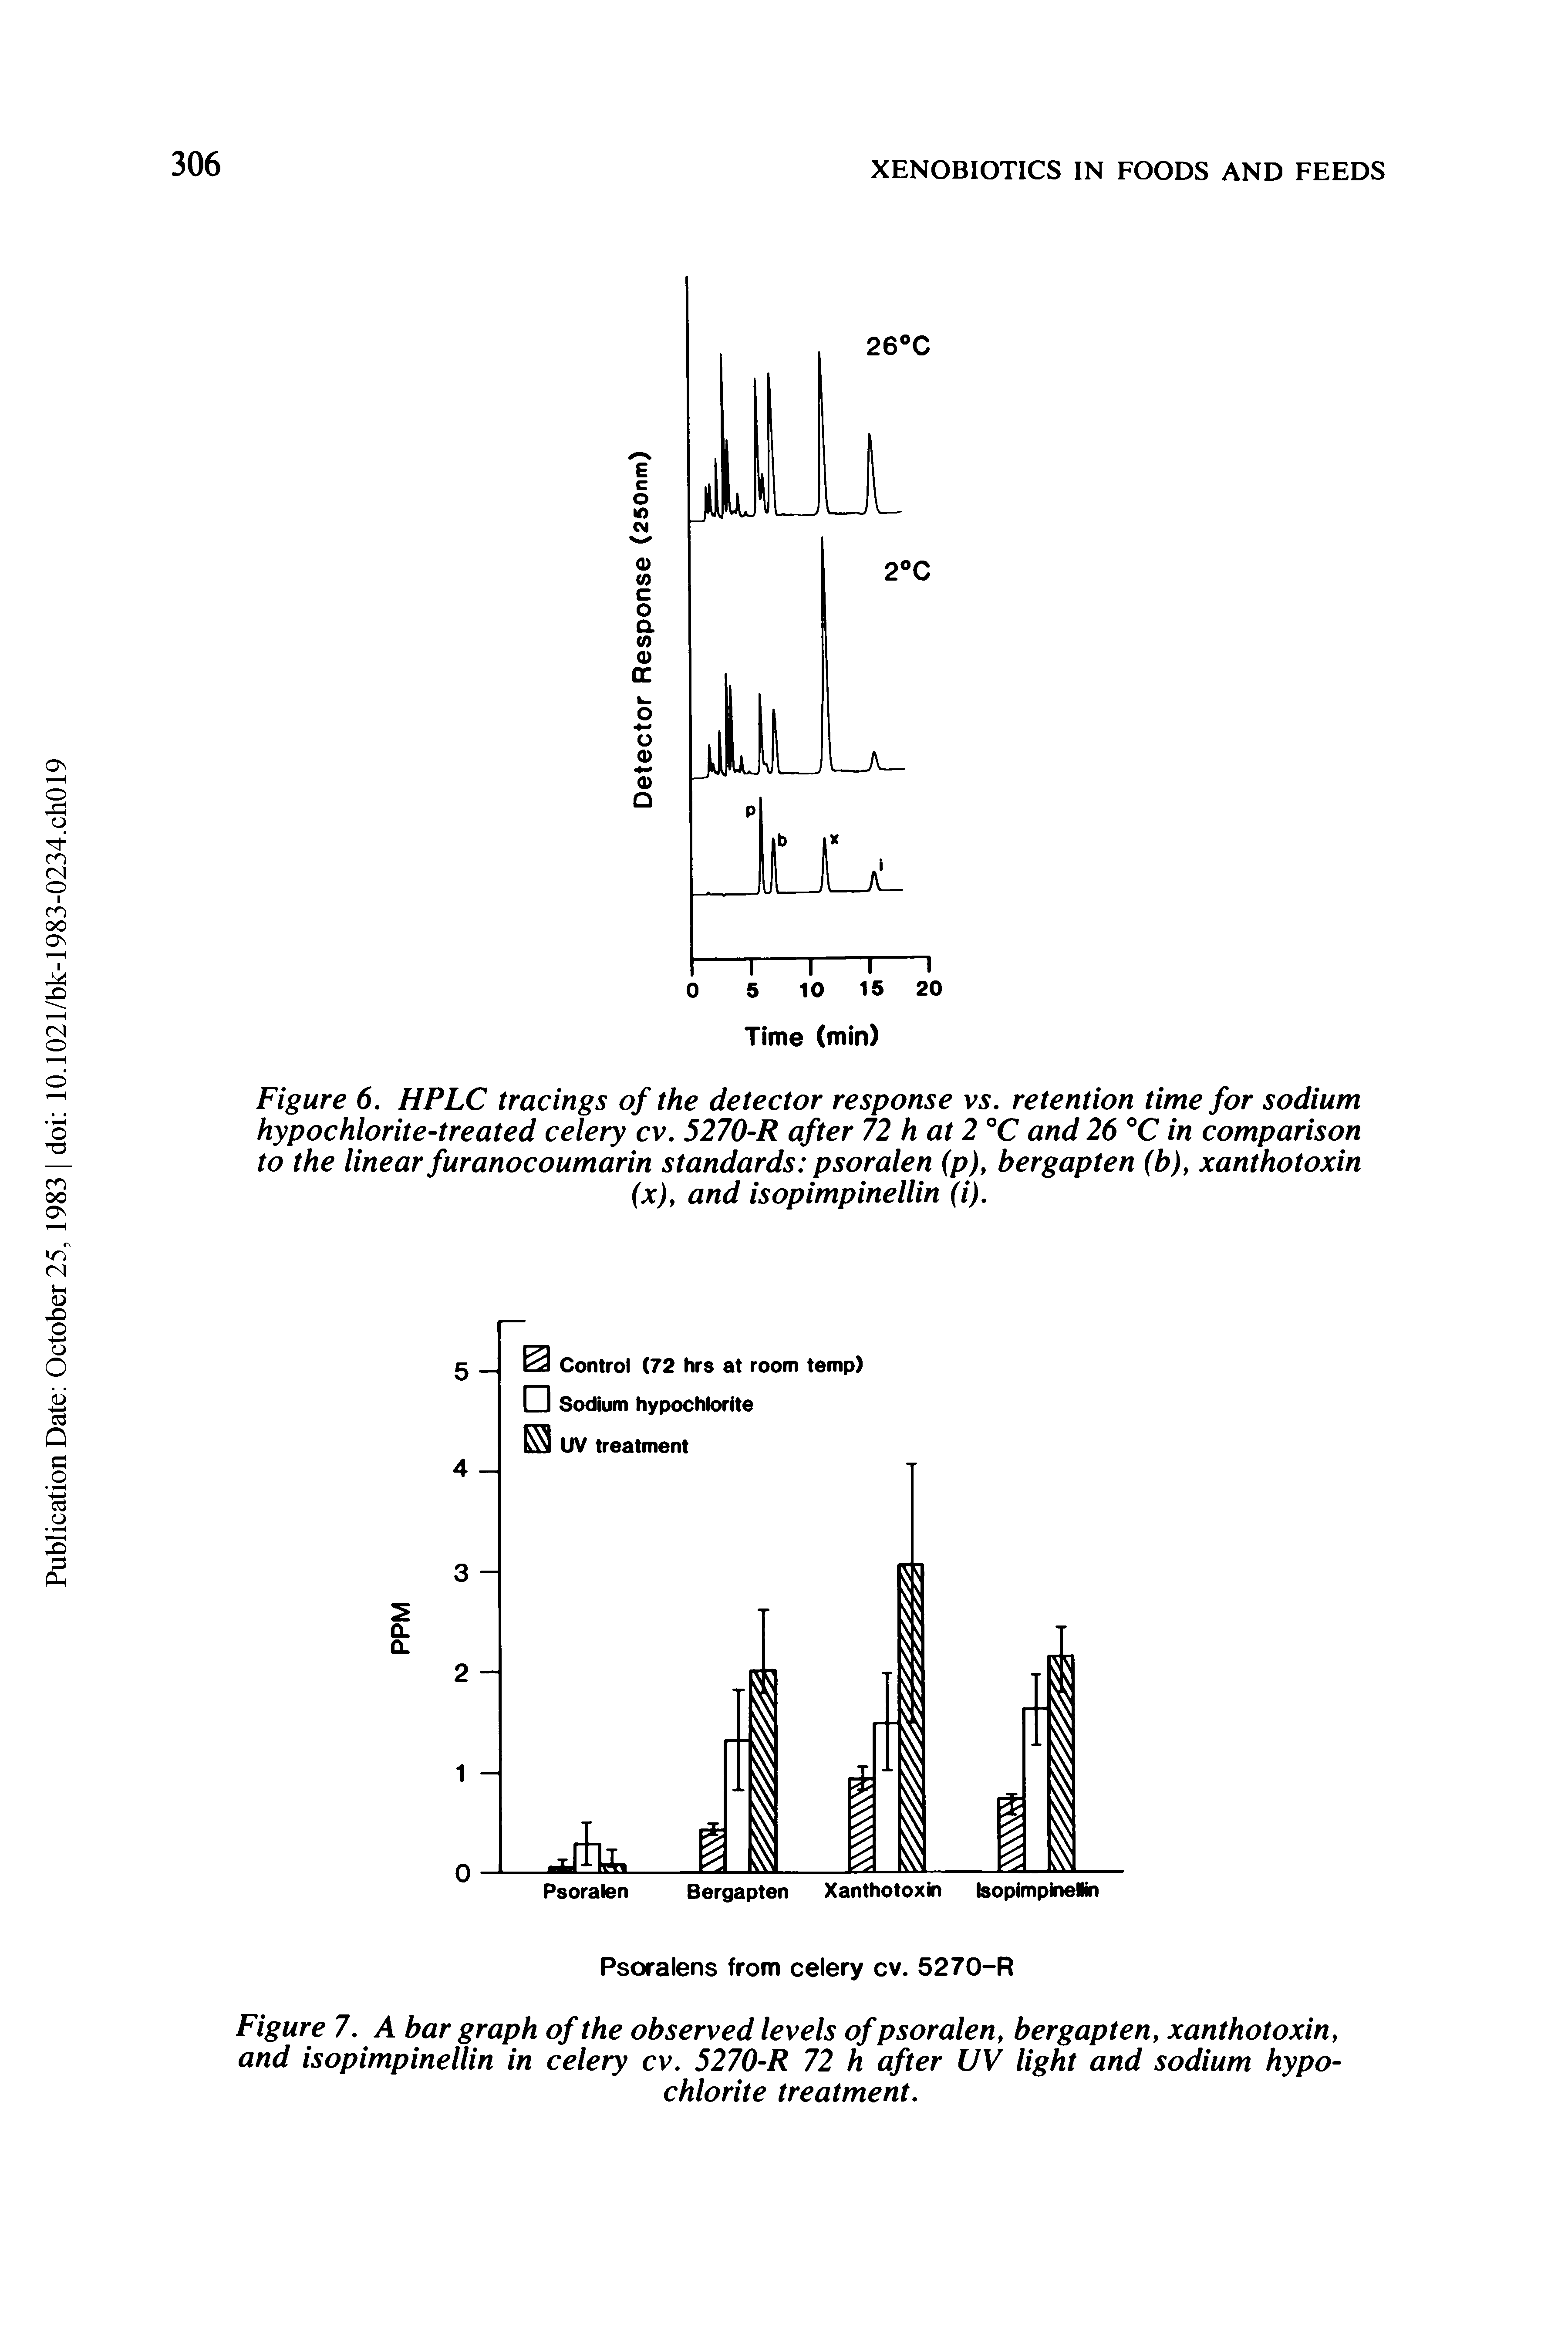 Figure 6. HPLC tracings of the detector response vs. retention time for sodium hypochlorite-treated celery cv. 5270-R after 72 hat 2 °C and 26 °C in comparison to the linear furanocoumarin standards psoralen (p), bergapten (b), xanthotoxin (x), and isopimpinellin (i).